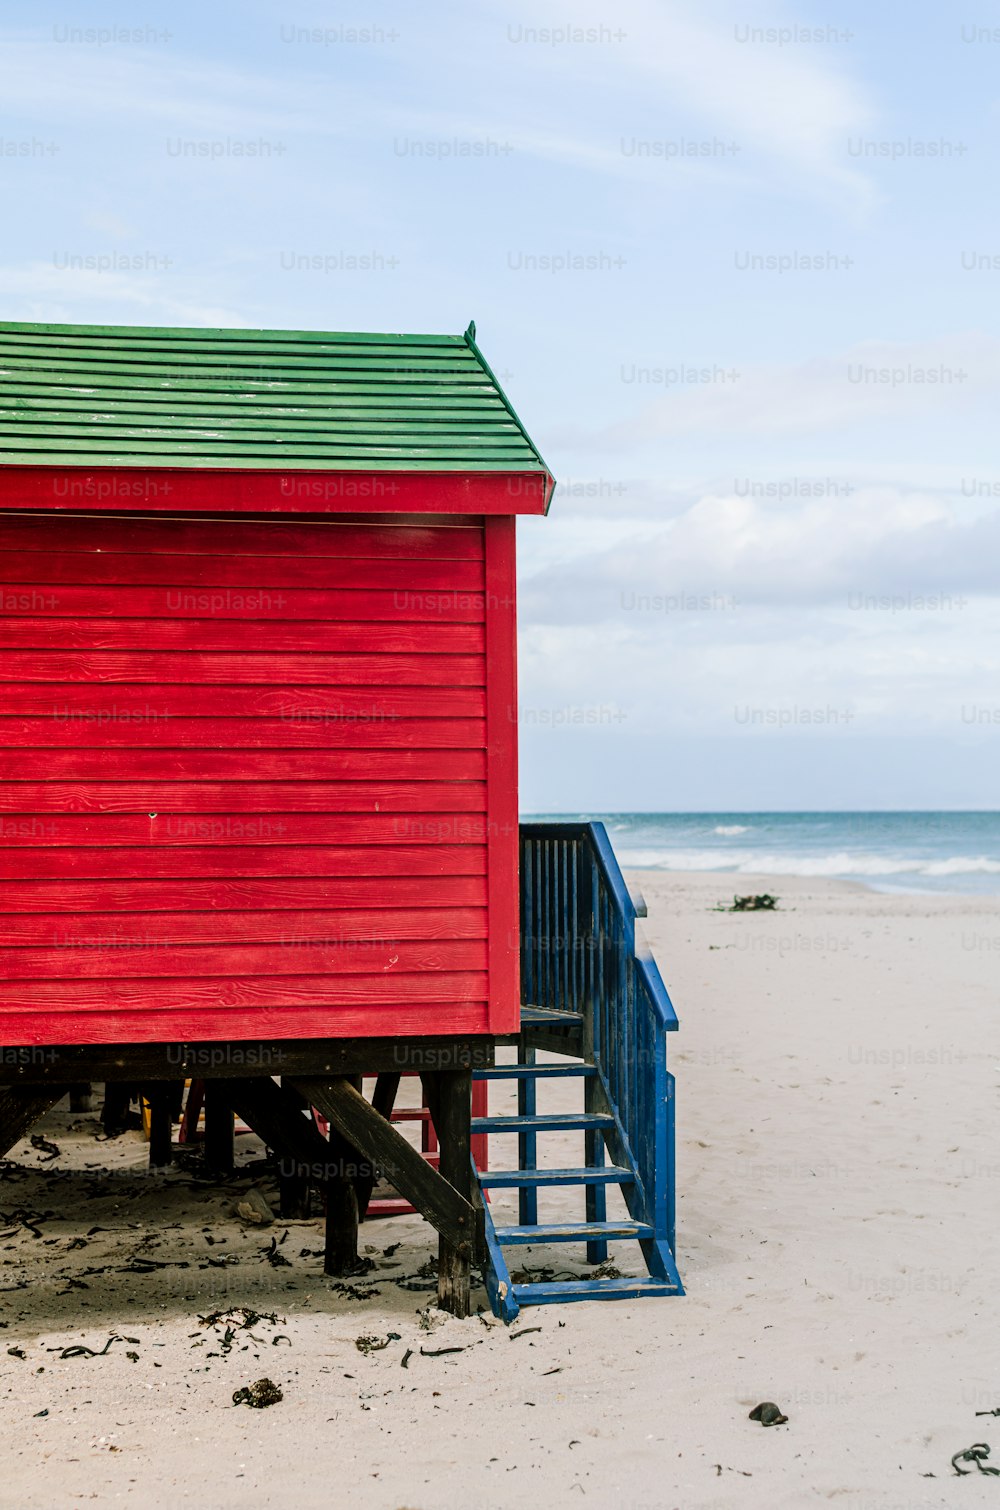 a red building with a green roof on a beach